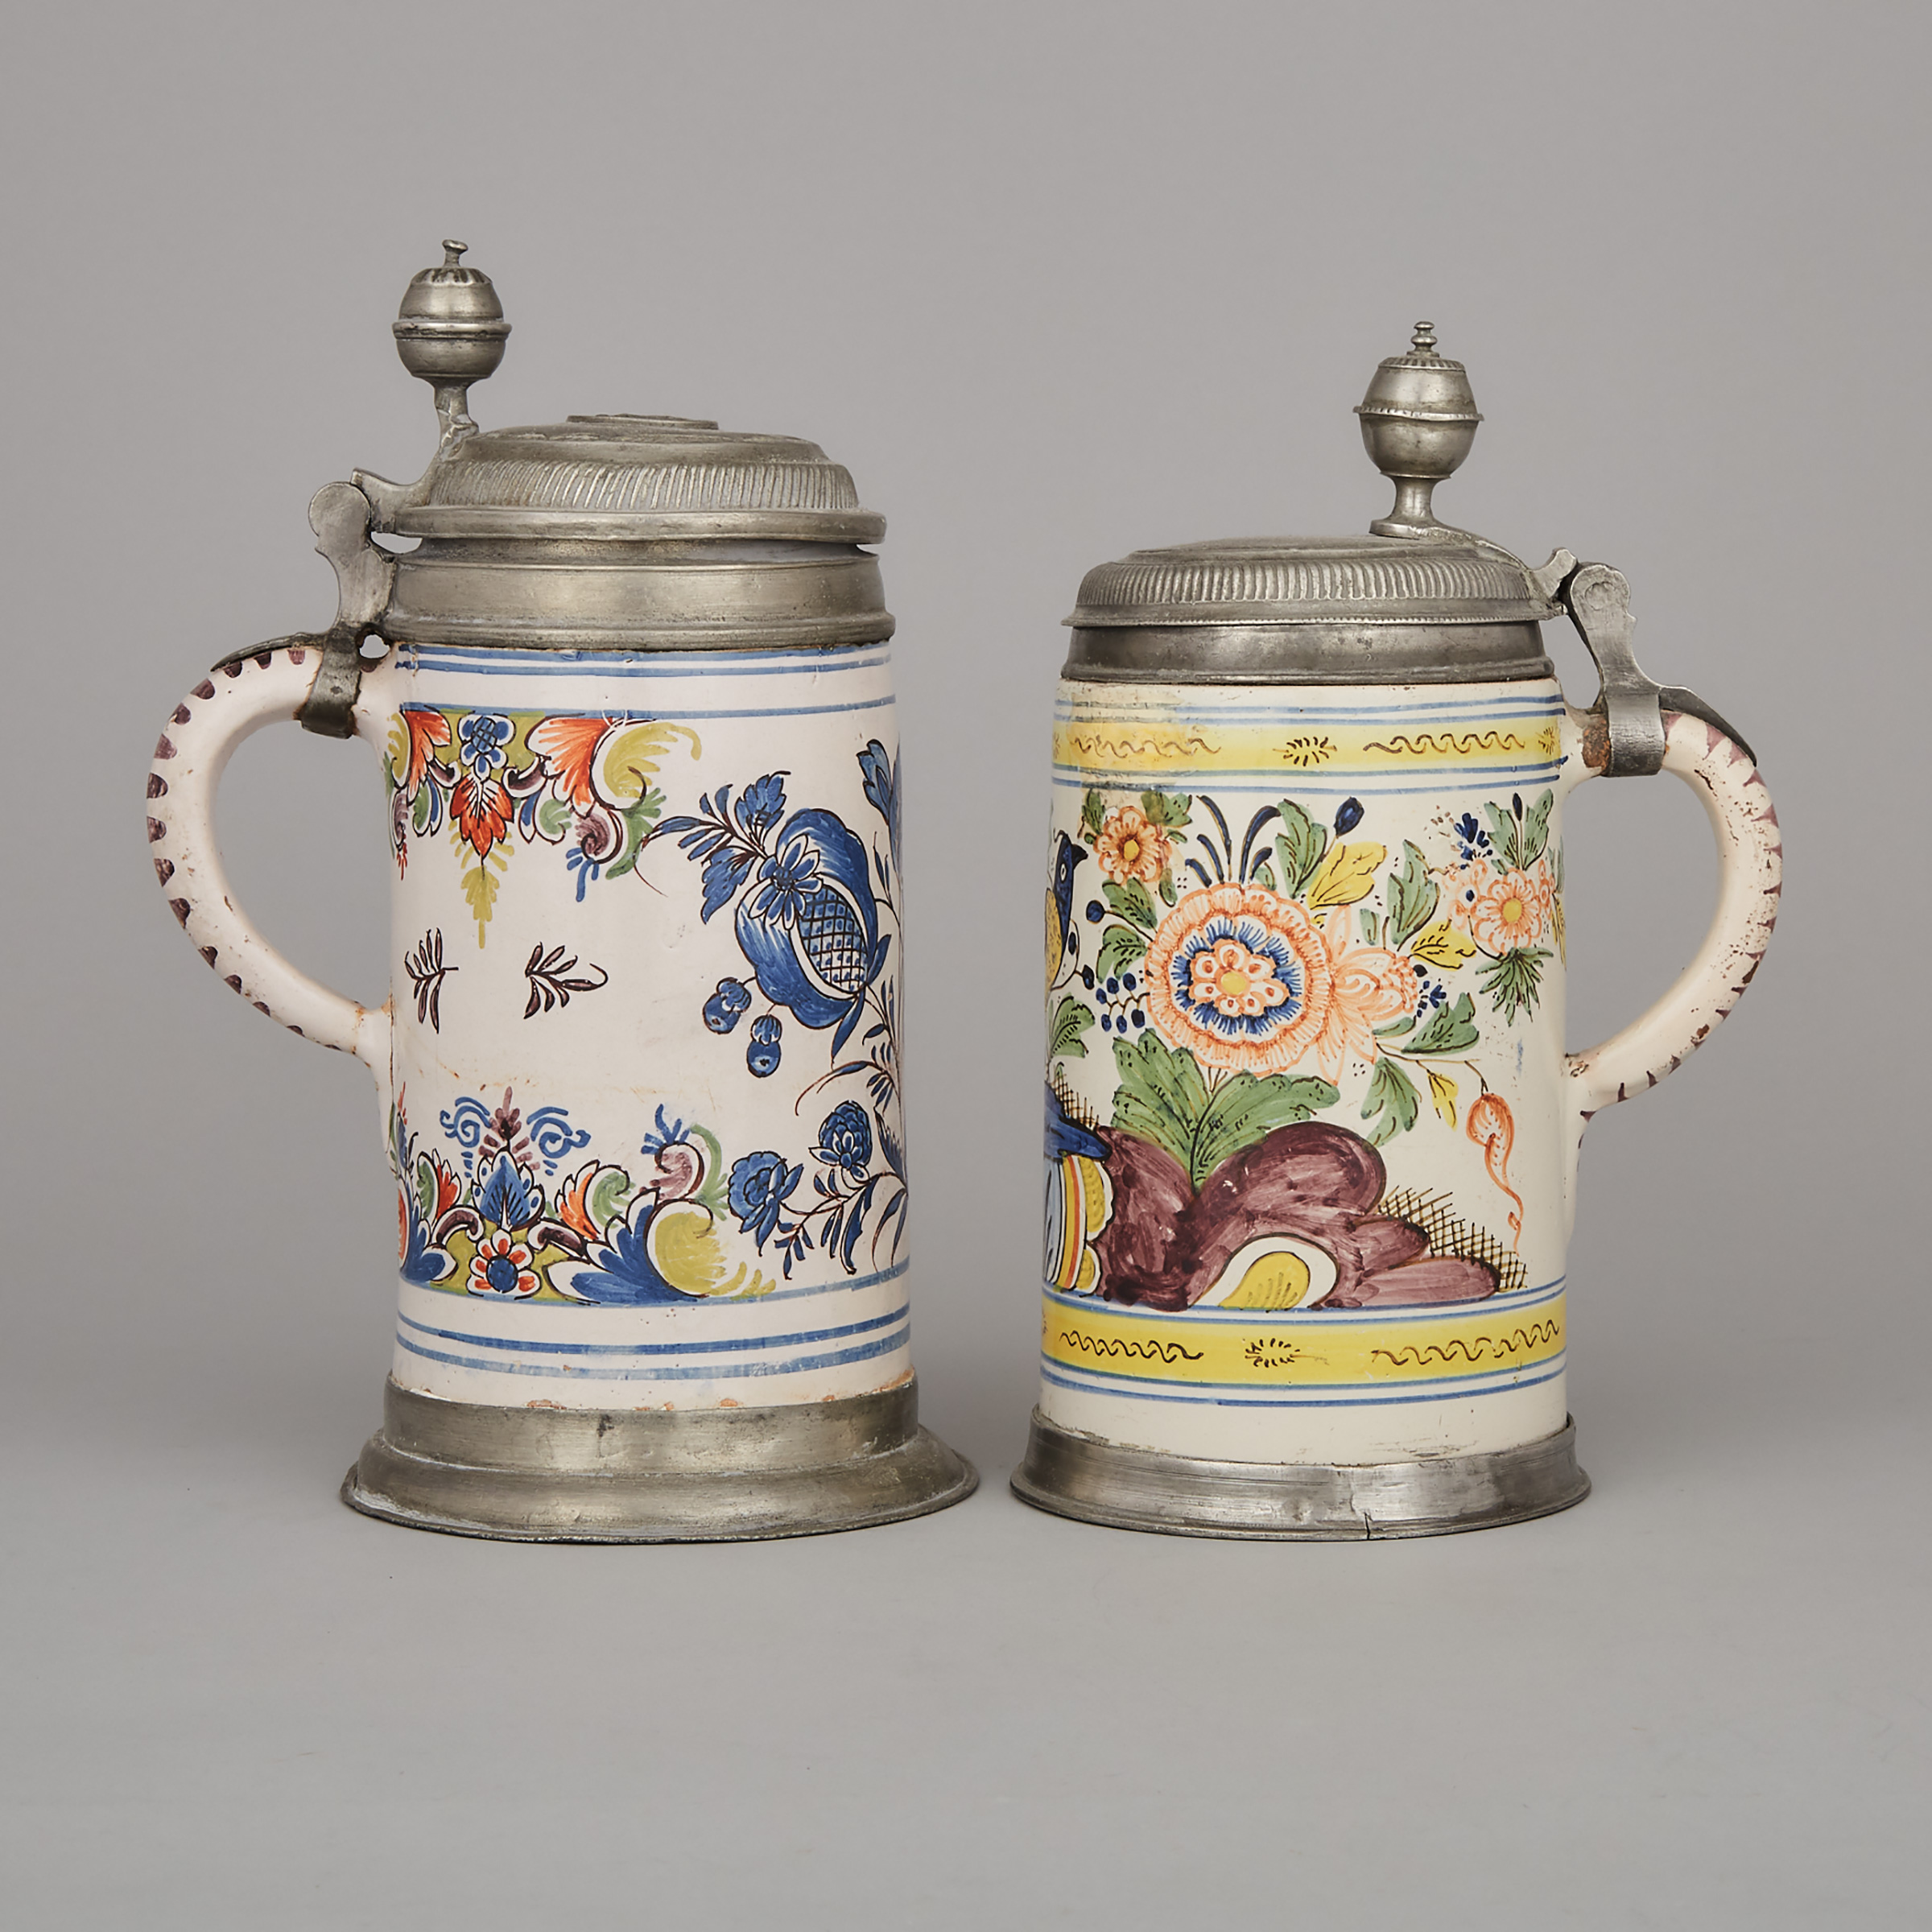 Two German Pewter Mounted Faience Steins, late 18th century